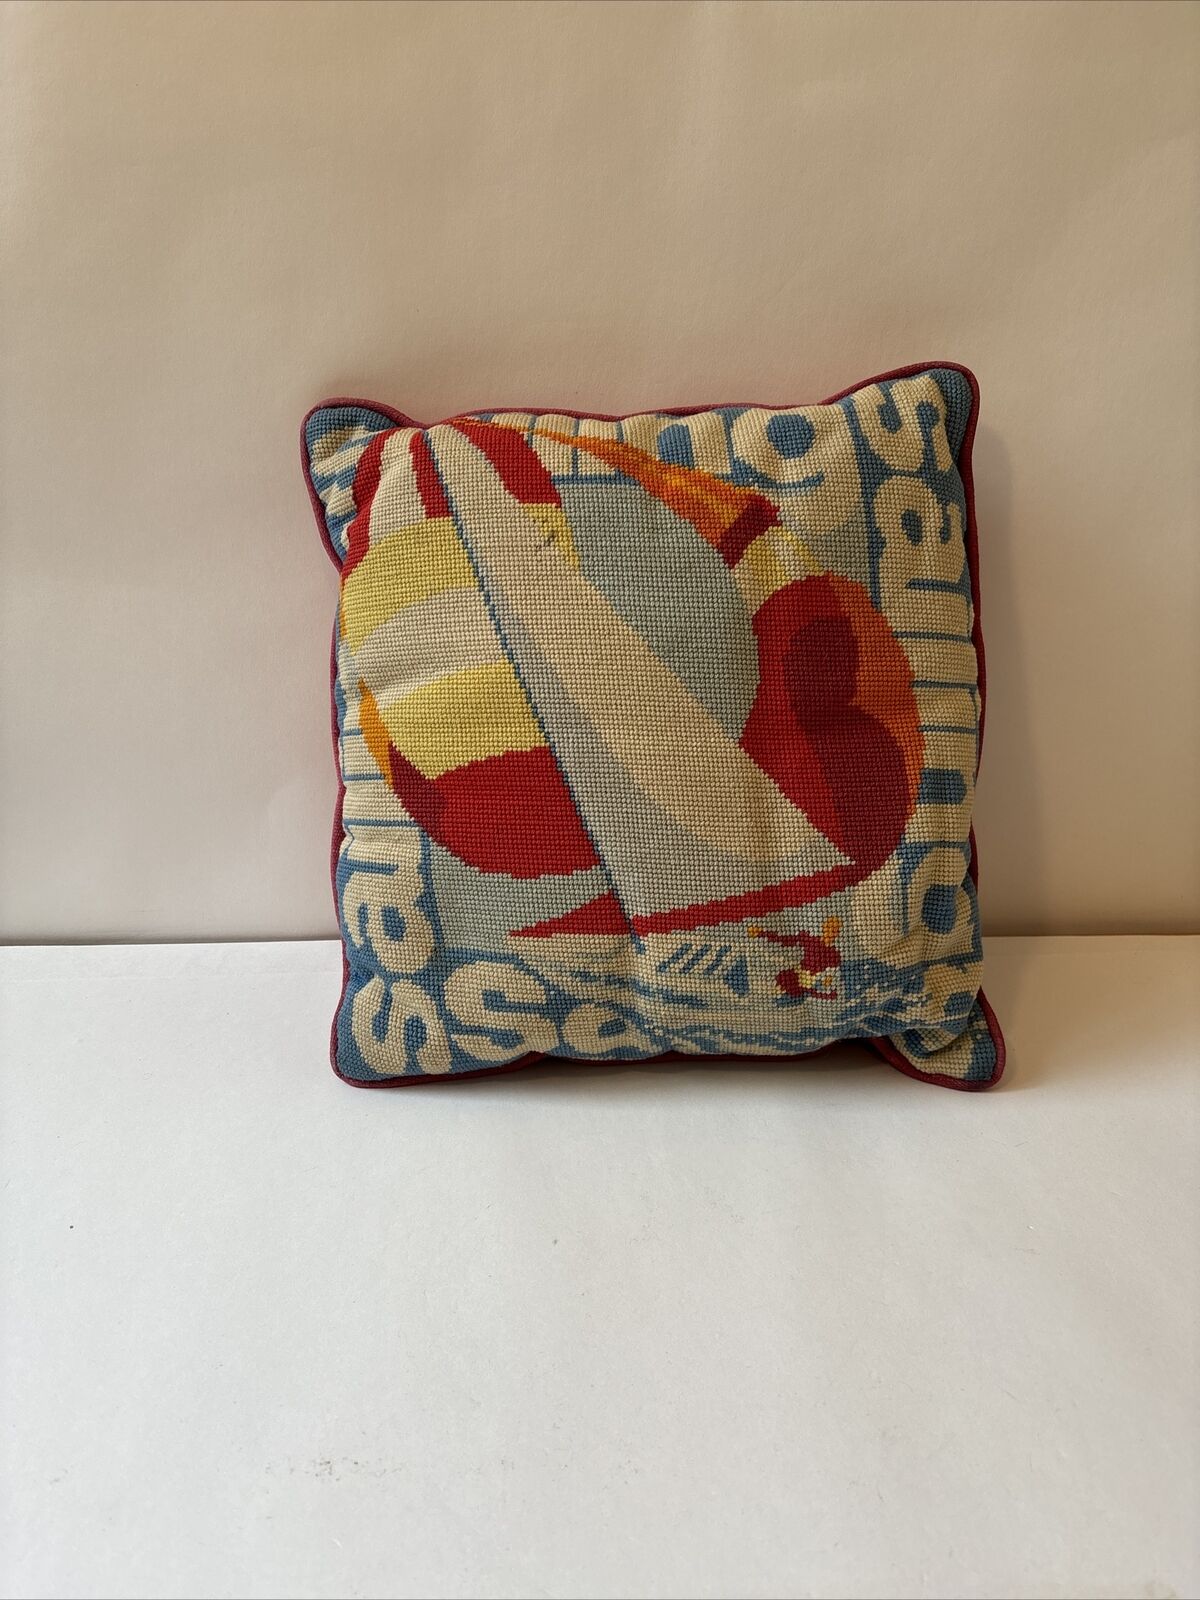 Vintage Needlepoint Sailing Pattern Throw Pillow - Flaw (Some stains)